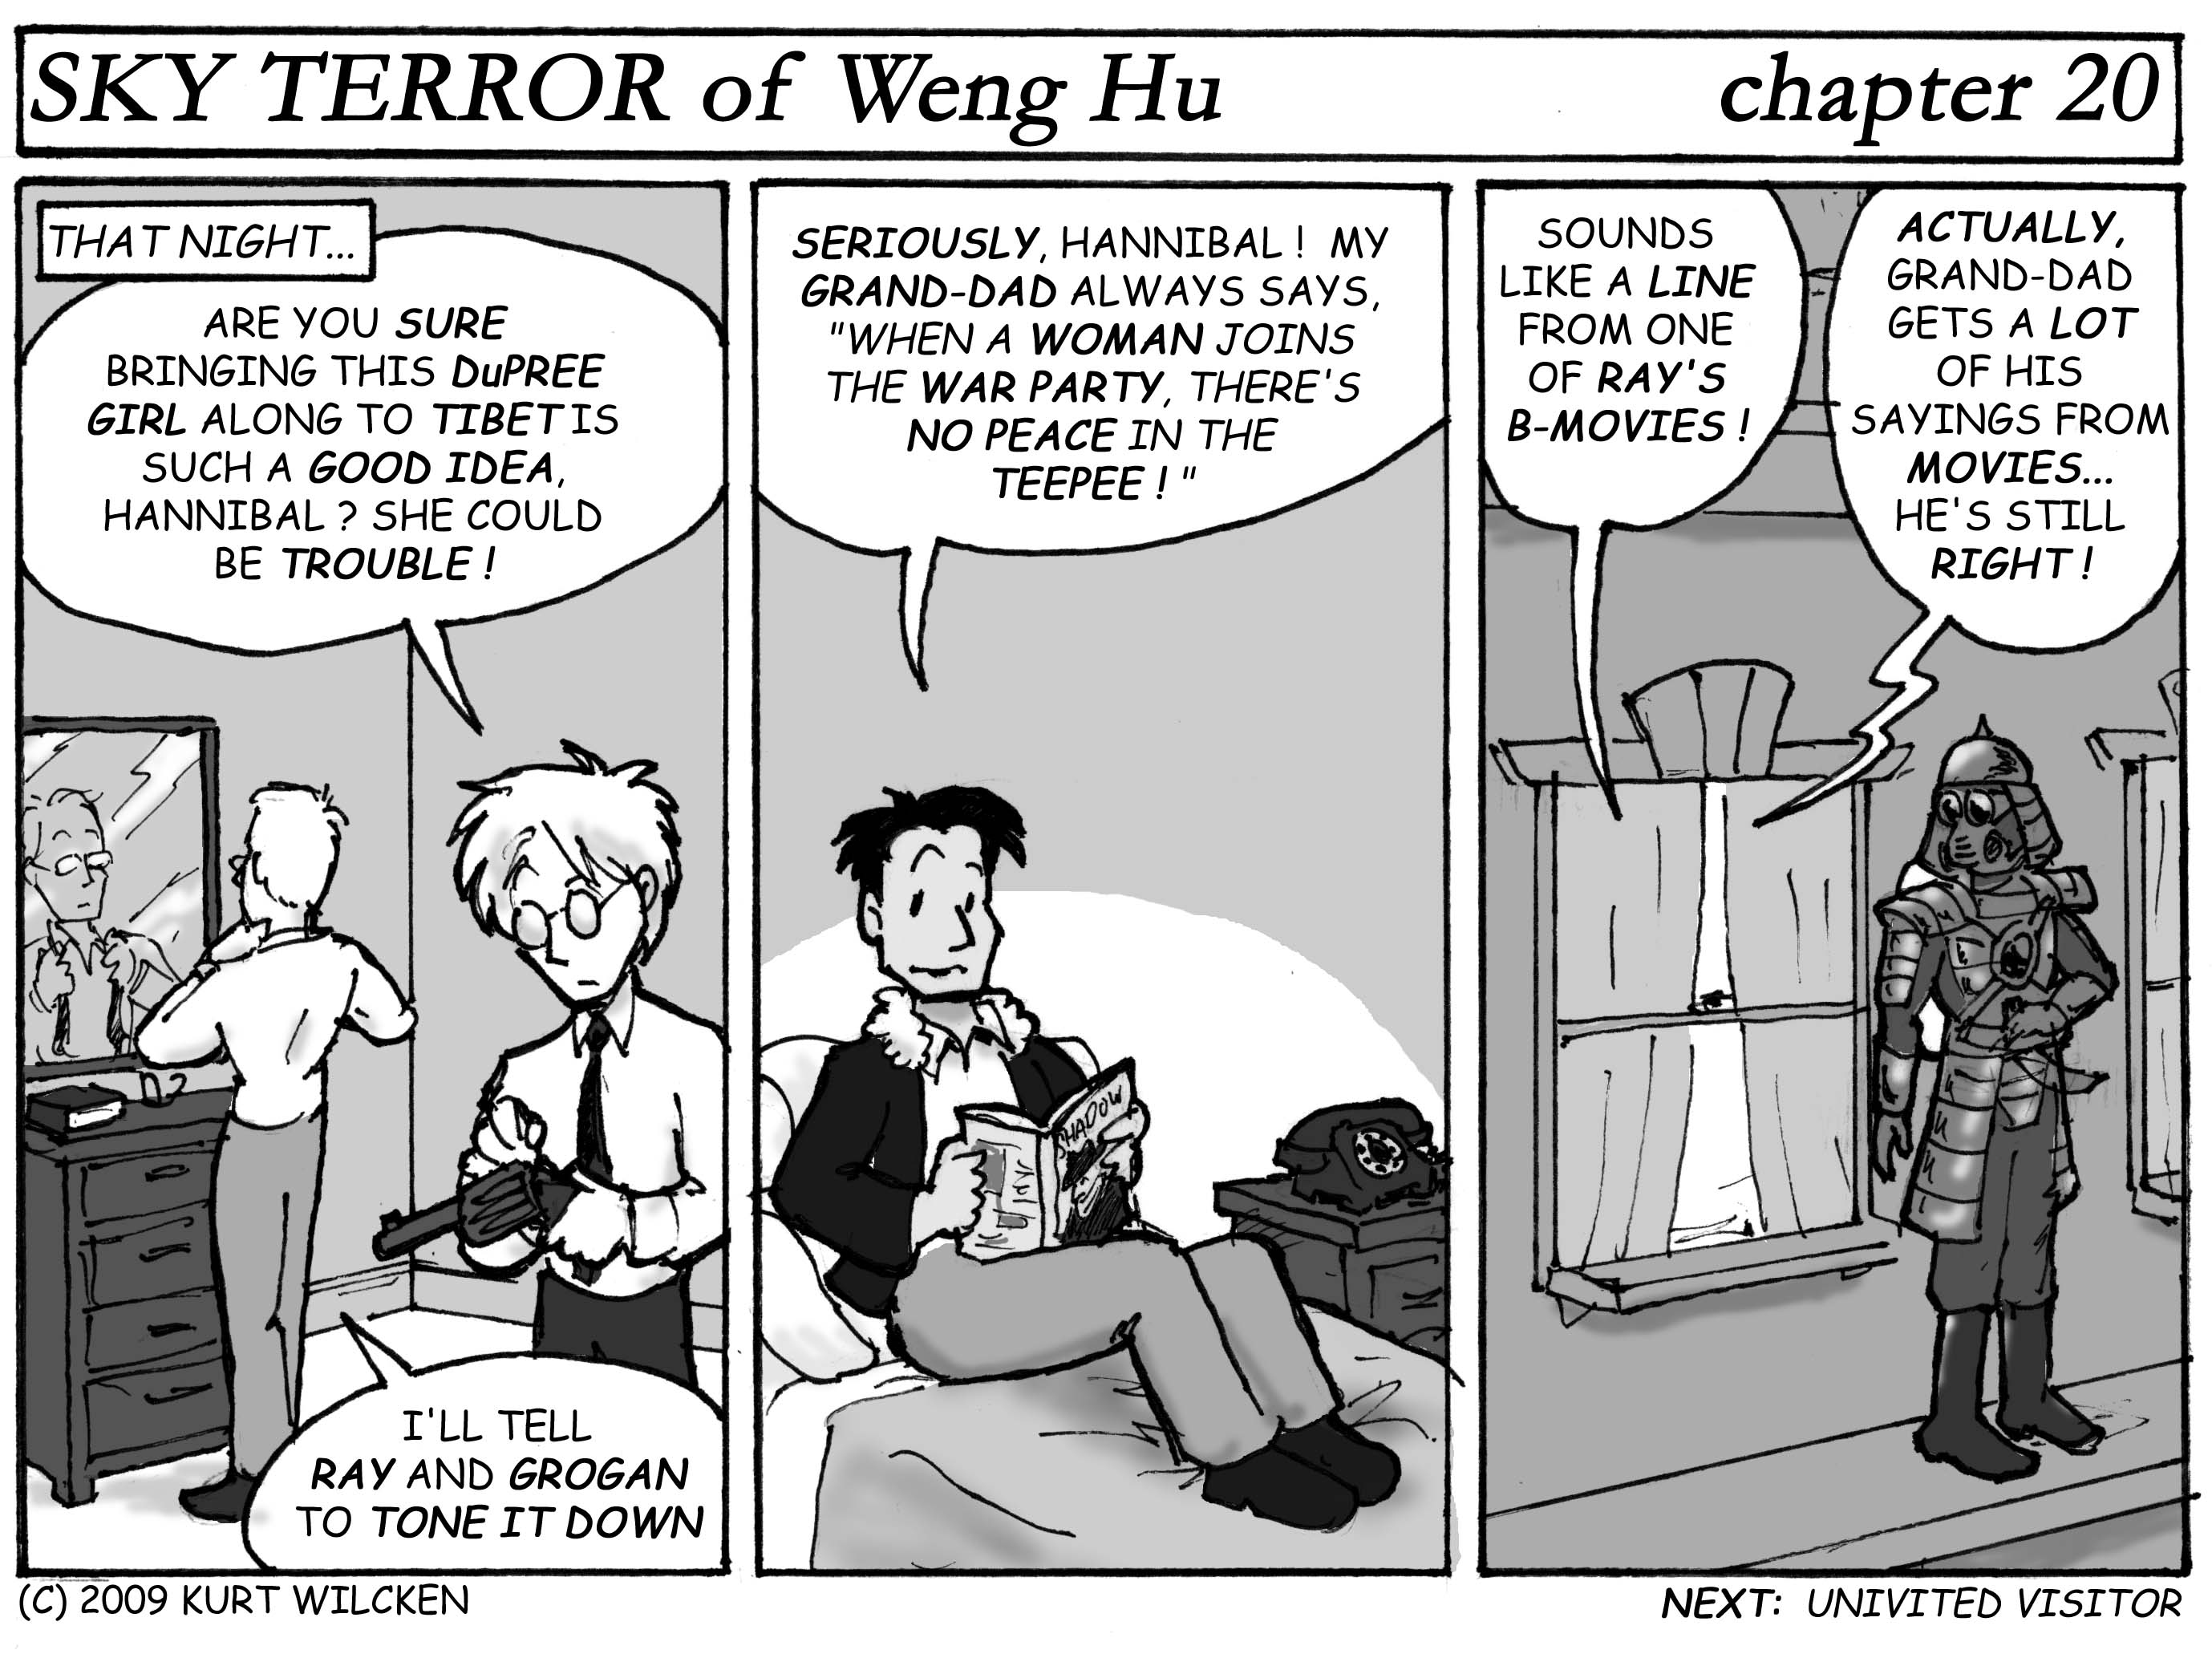 SKY TERROR of Weng Hu:  Chapter 20 — Trouble in the Teepee